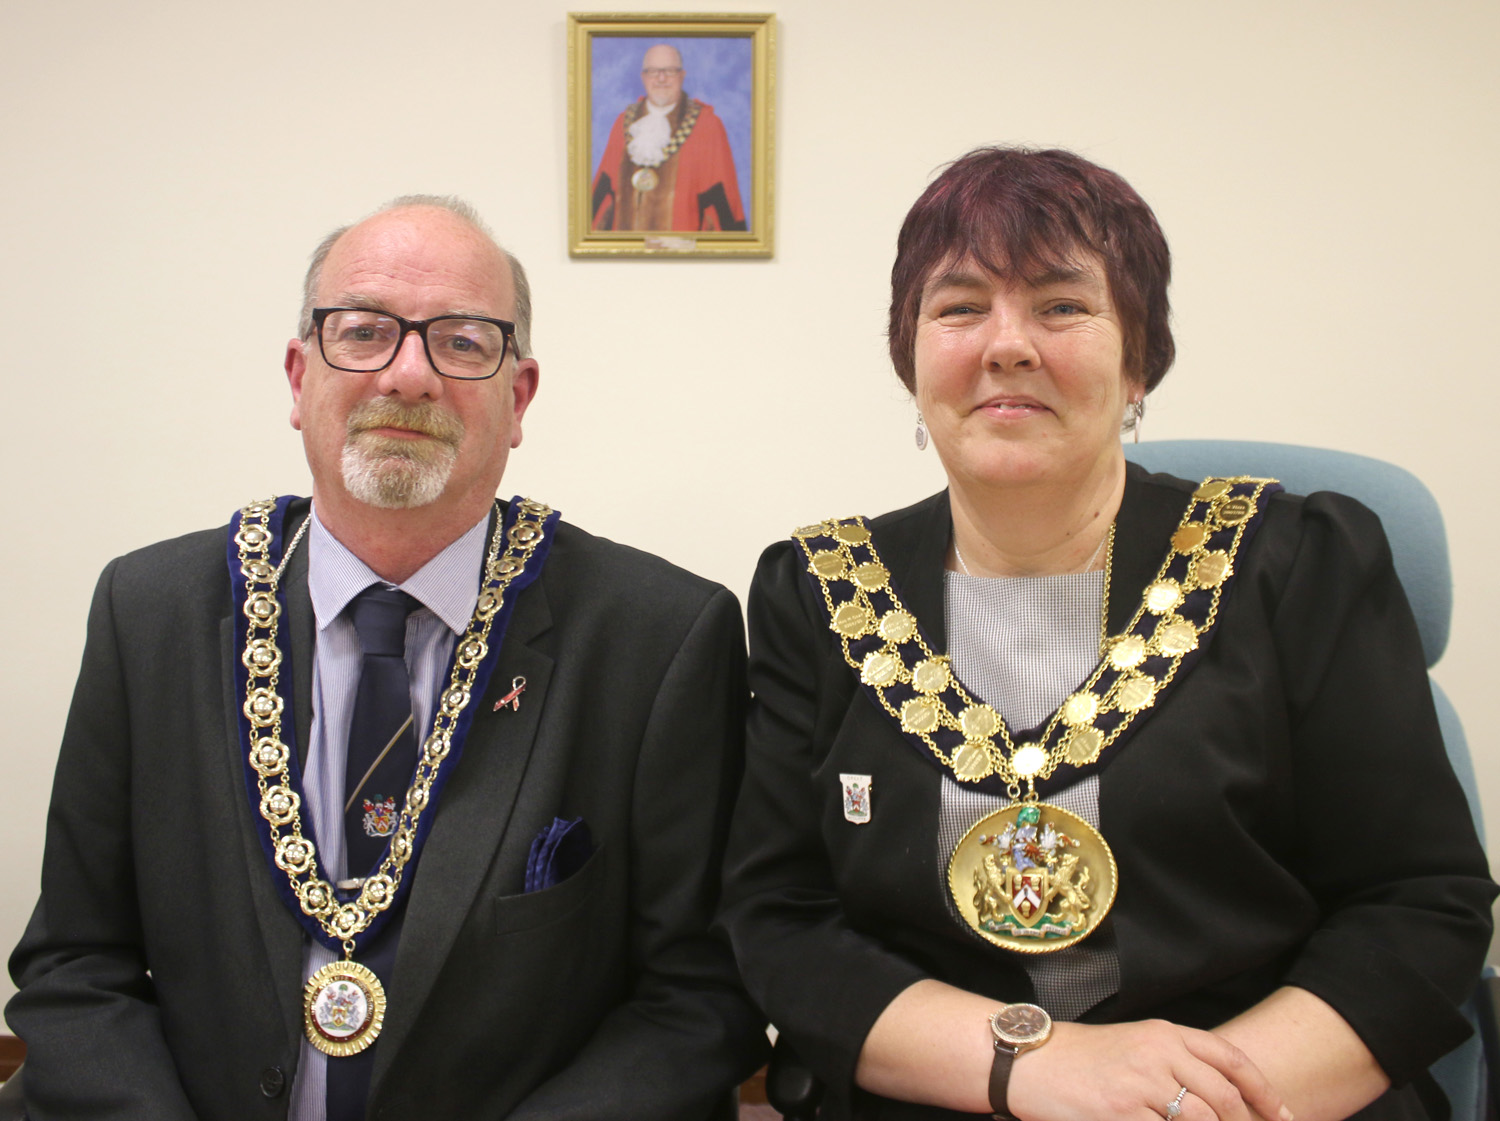 Independents Bid for Recognition at Council AGM